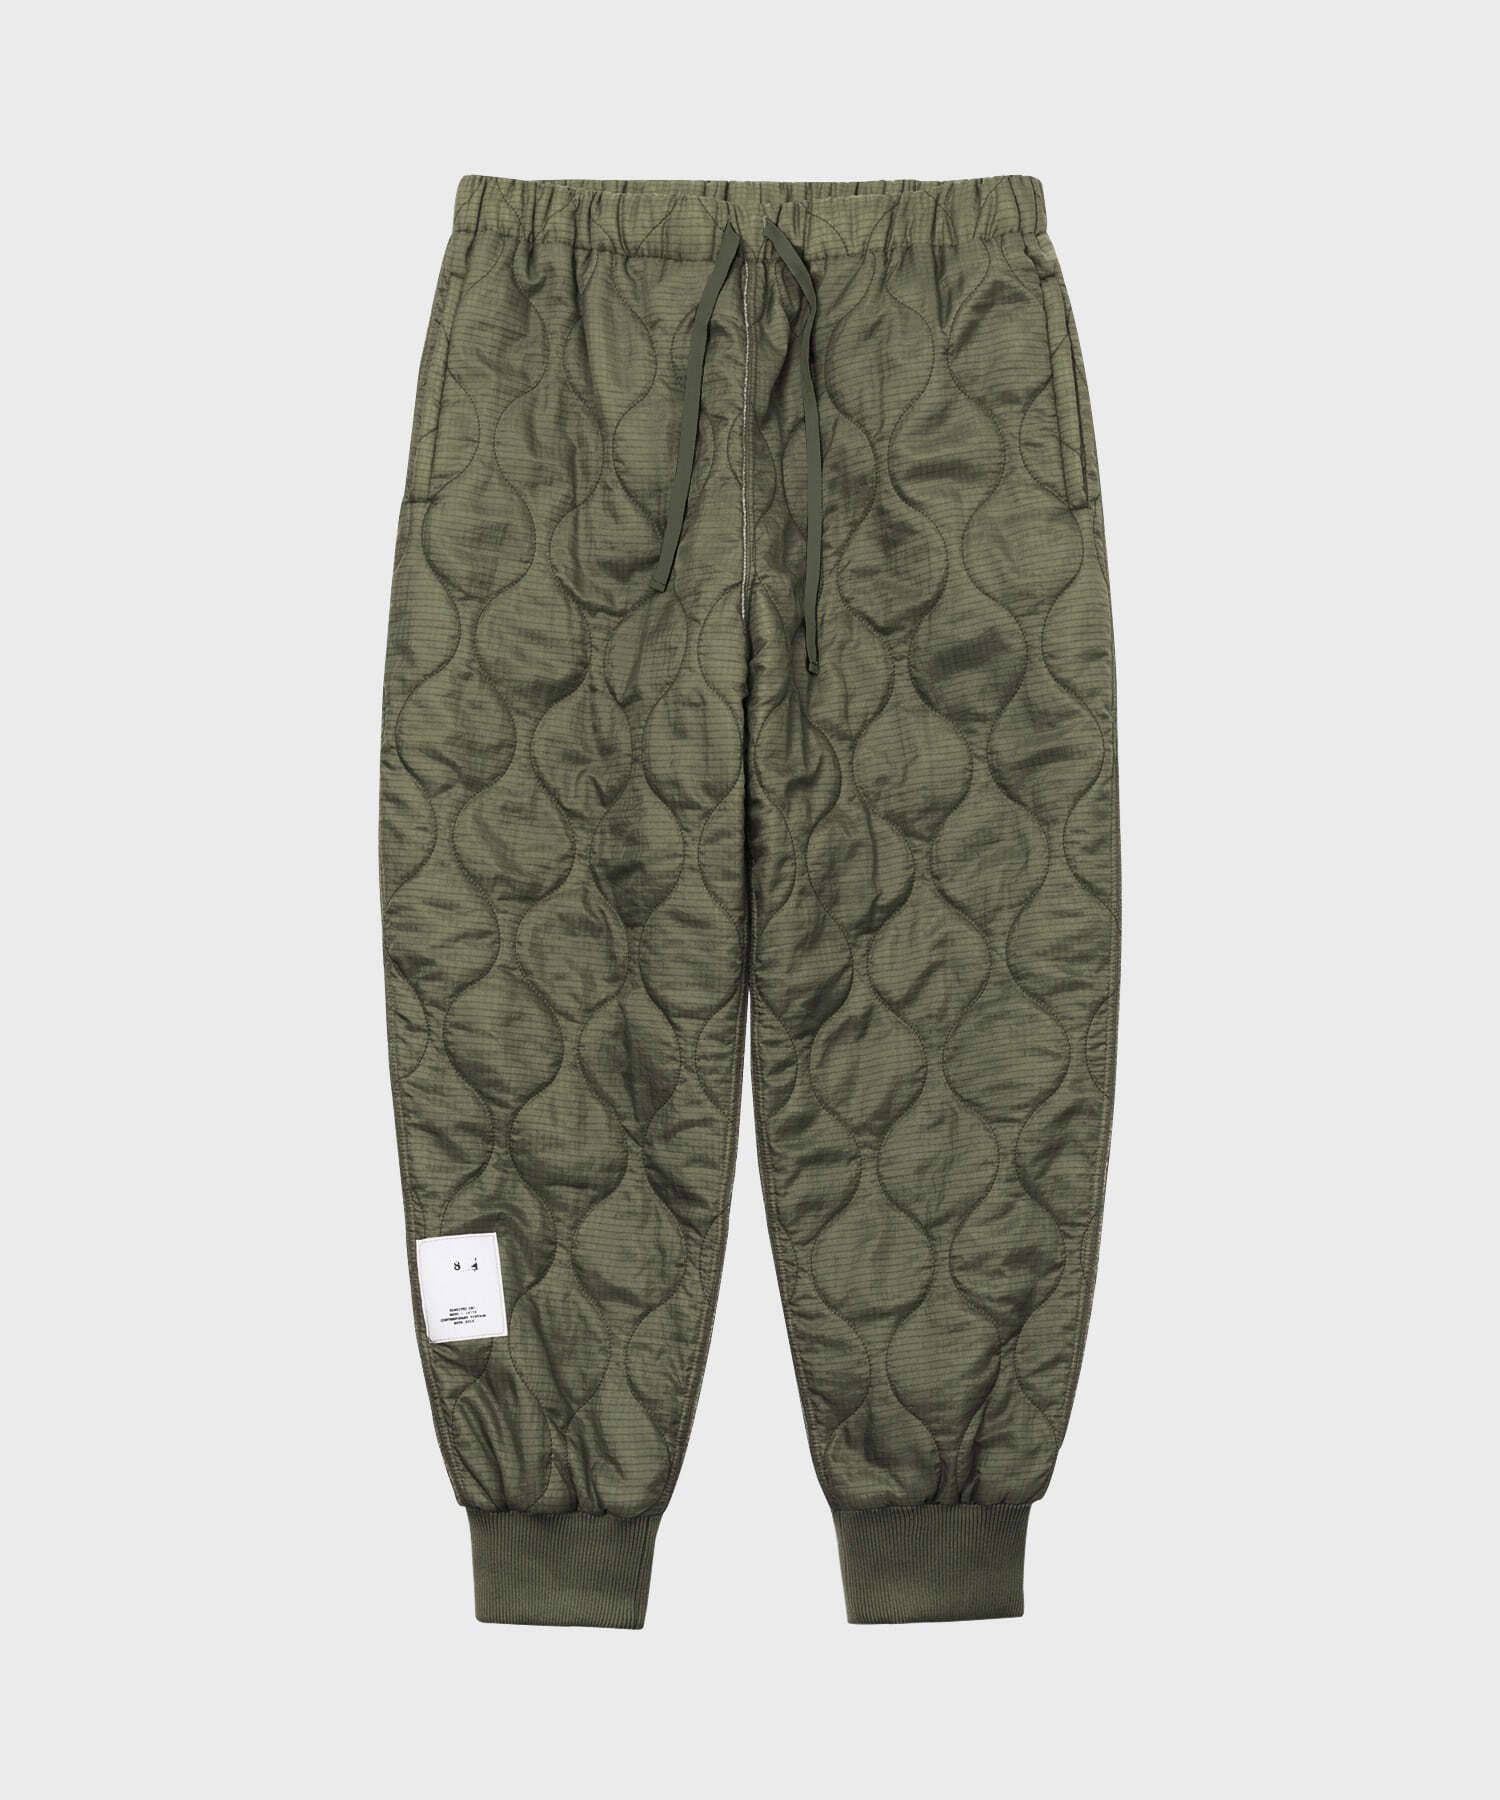 M65 QUILTING PANTS (OLIVE DRAB)